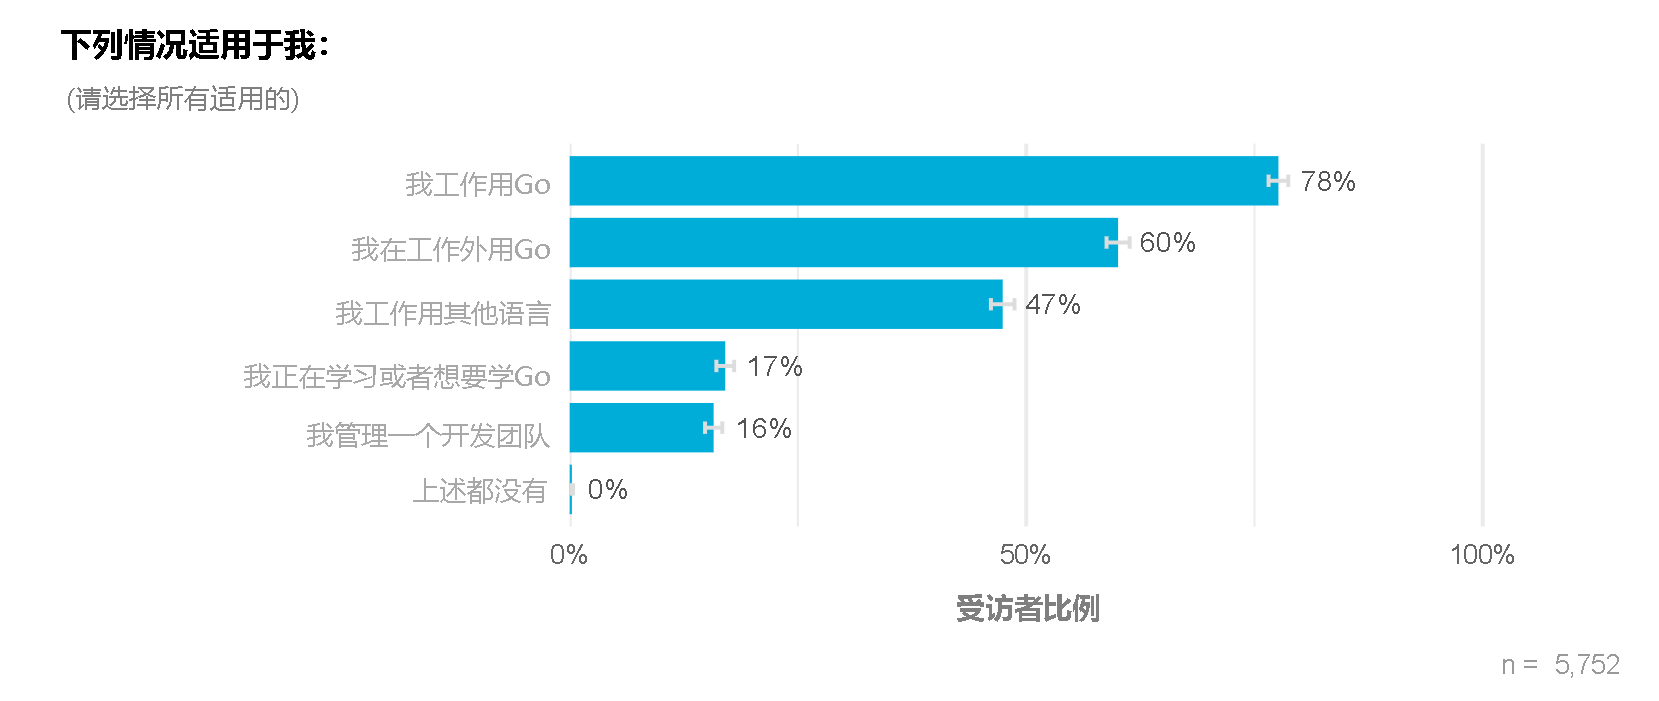 Chart showing distribution of where respondents' use Go